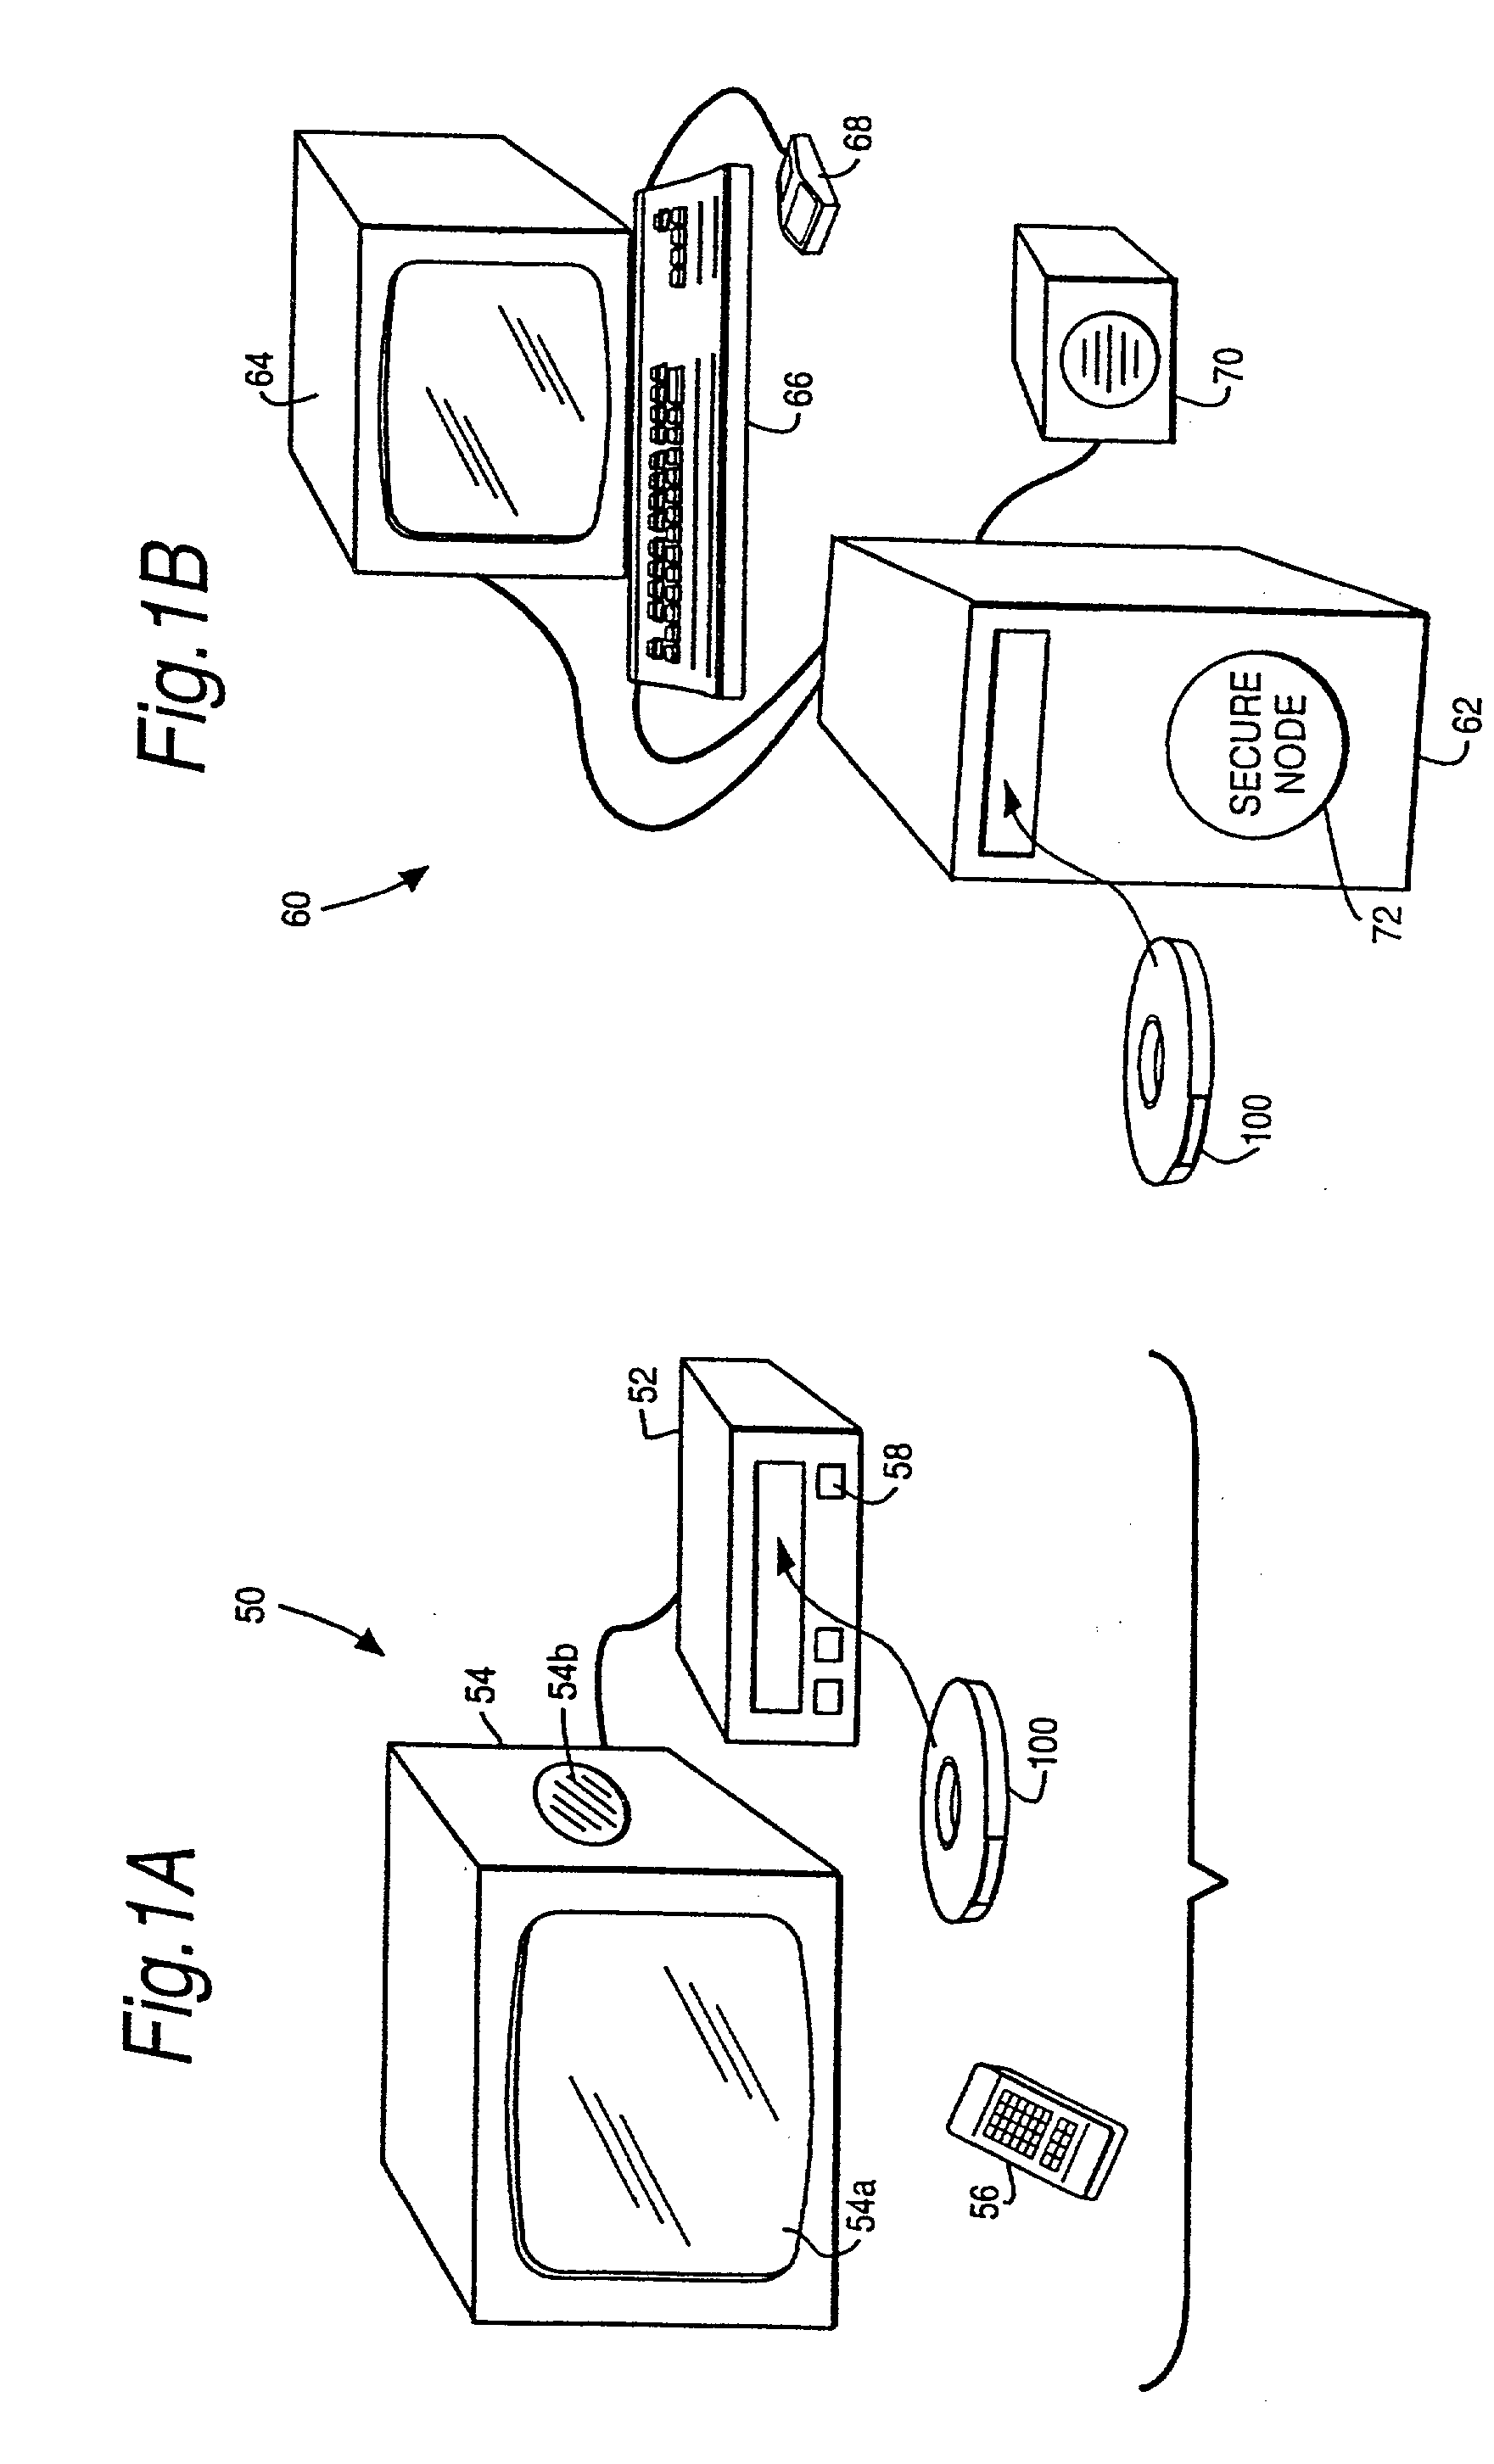 Cryptographic methods, apparatus and systems for storage media electronic rights management in closed and connected appliances